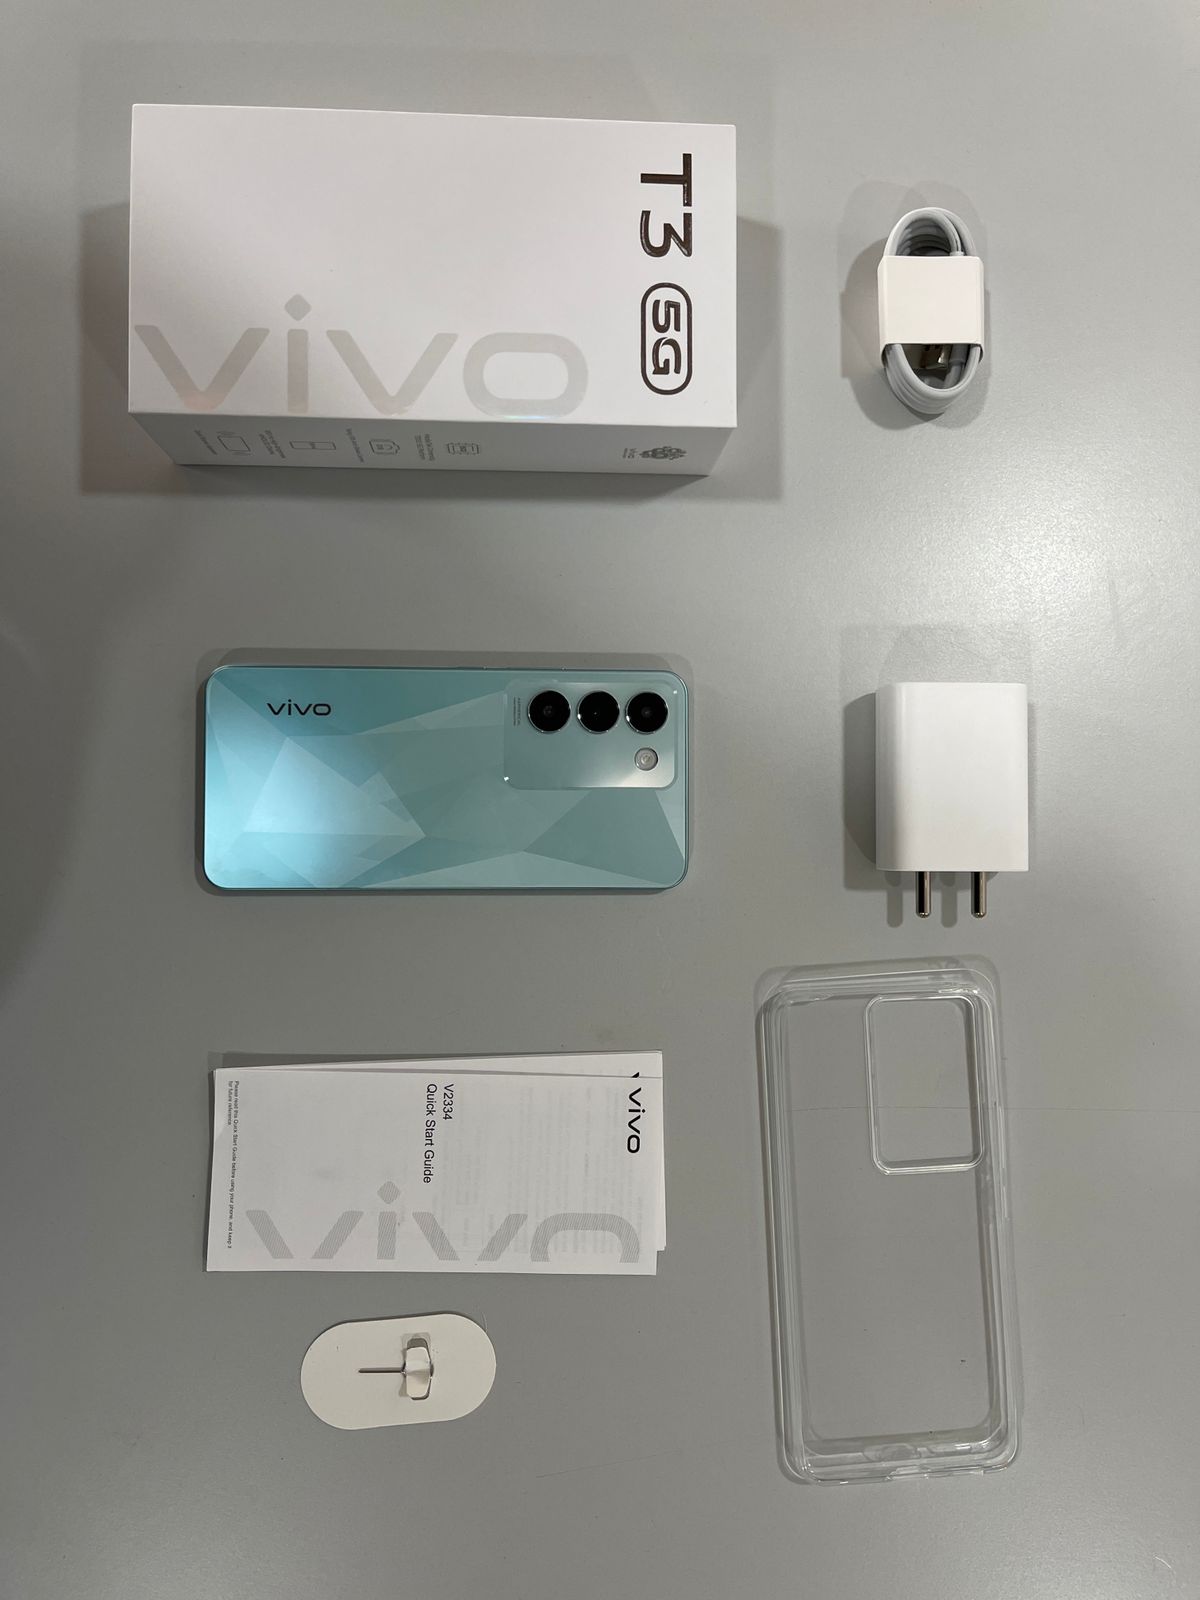 Unboxing the Vivo T3 5G